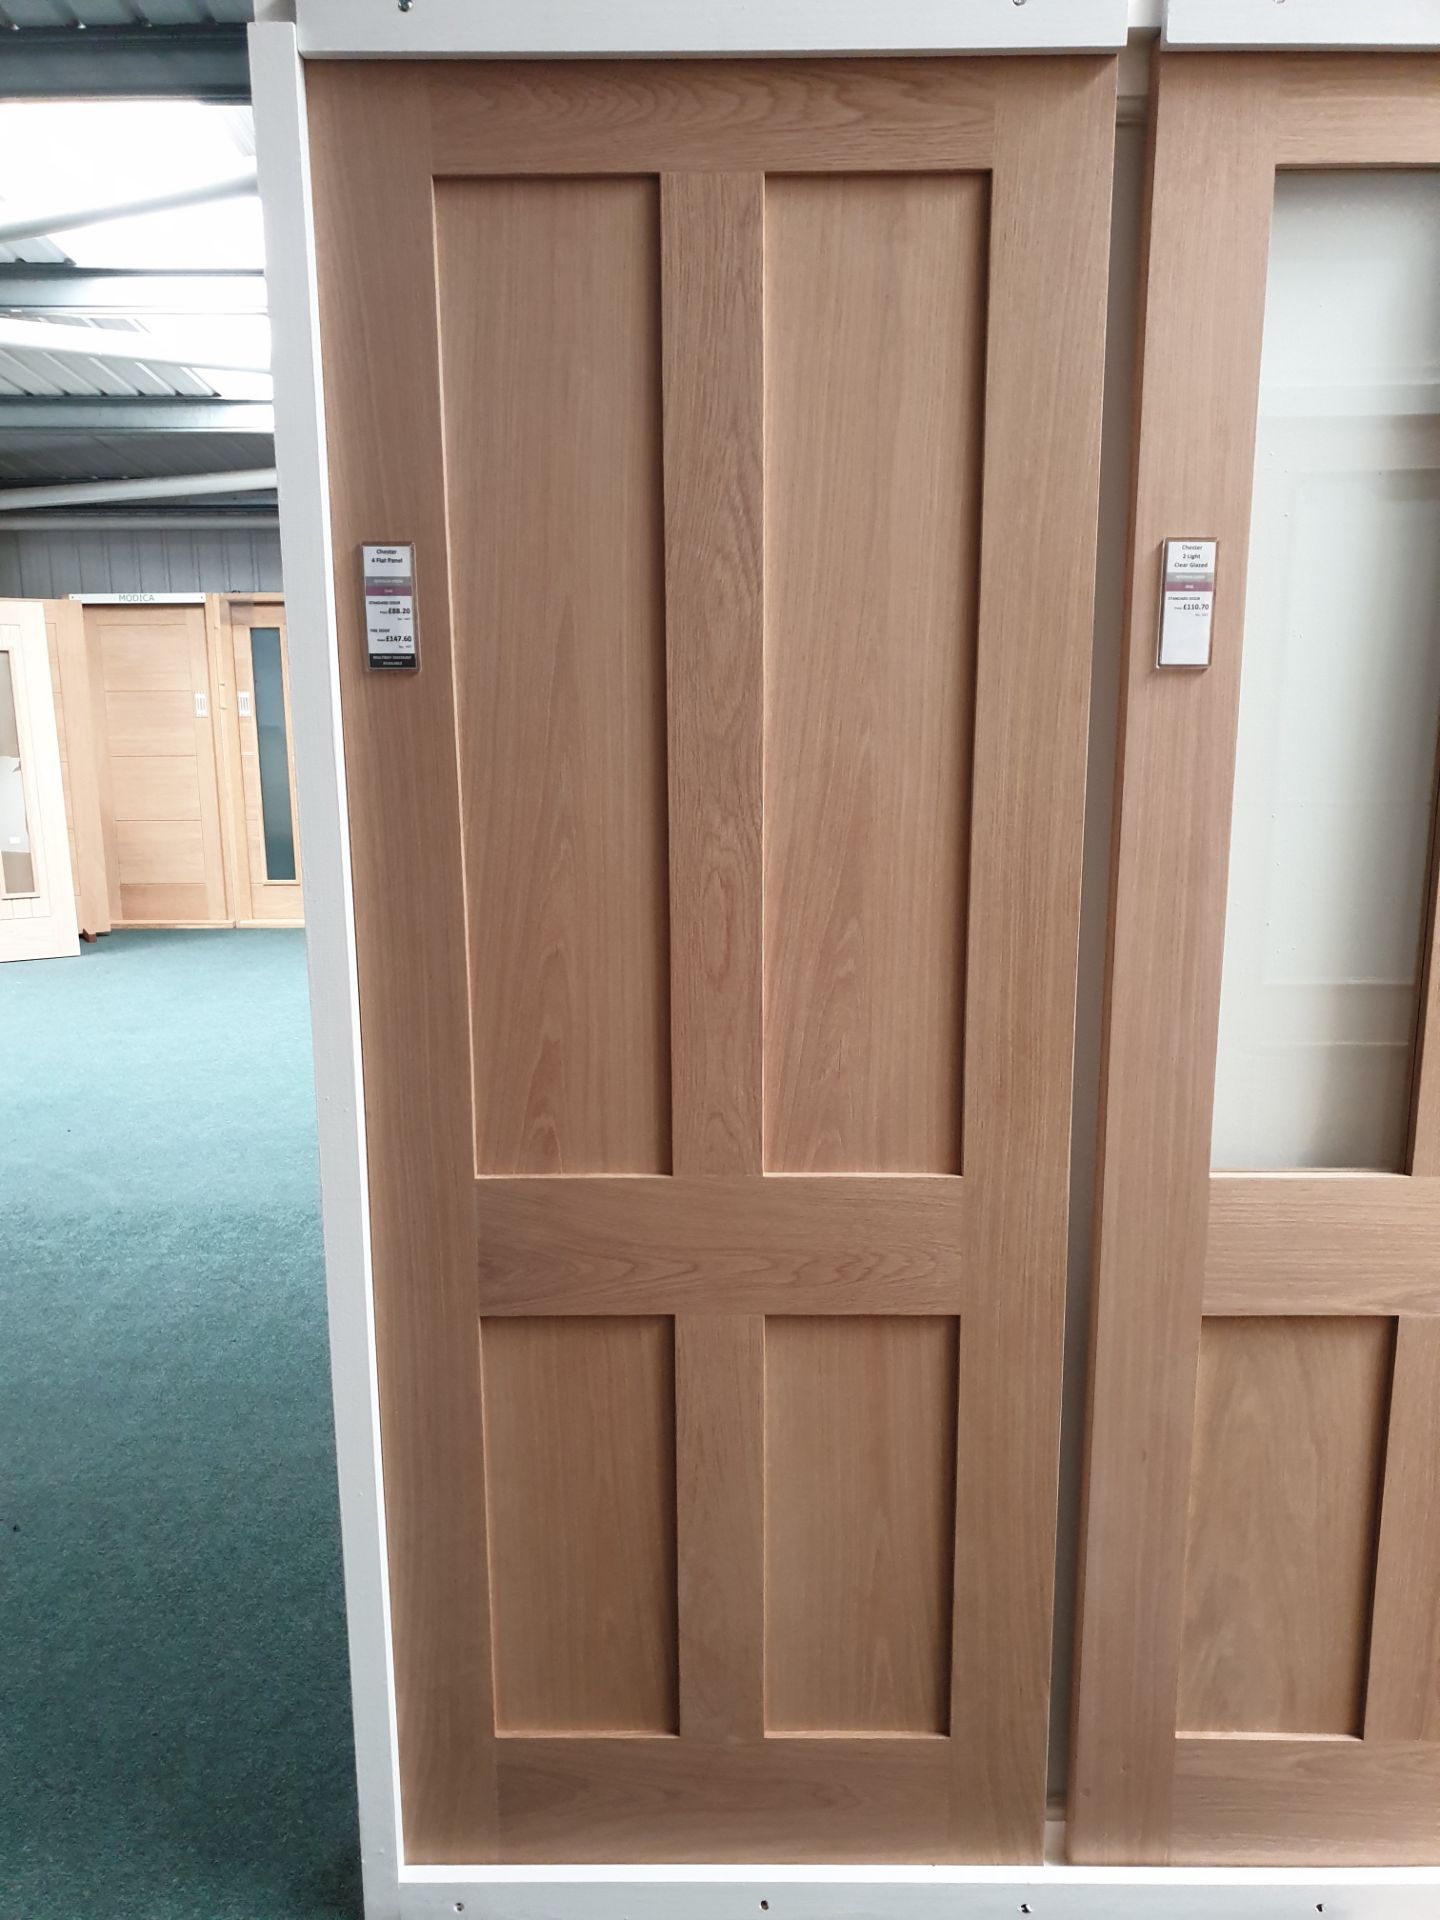 4 x Chester 4 Panel Internal Fire Door CHE4P27FD, 78”x27”x44mm - Lots to be handed out in order they